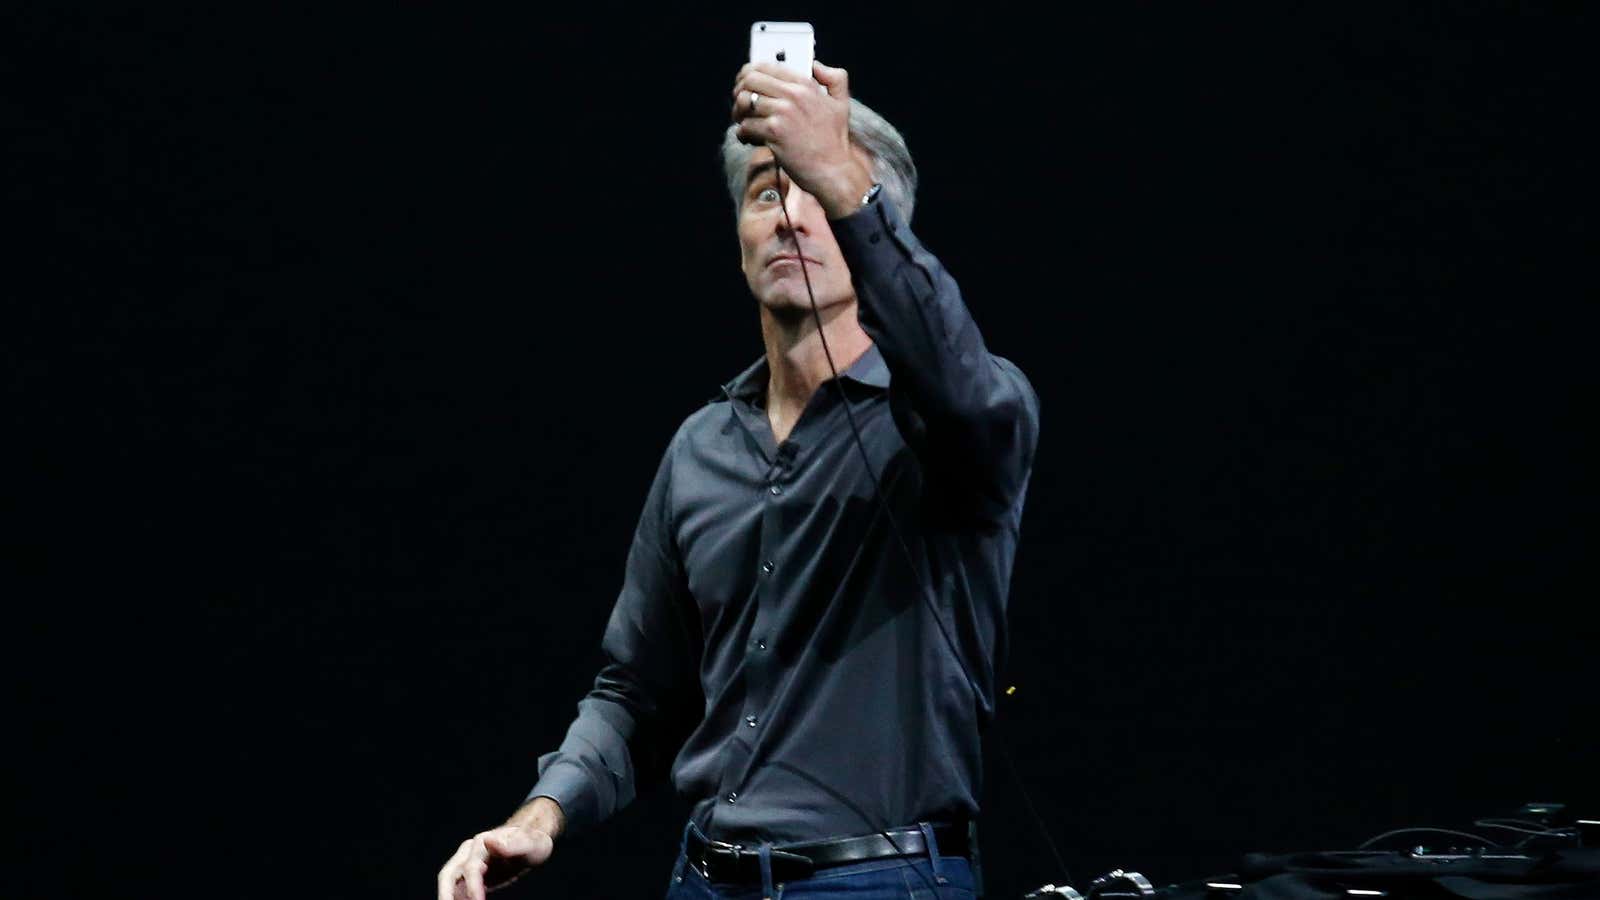 Apple’s Craig Federighi can’t believe the new features.